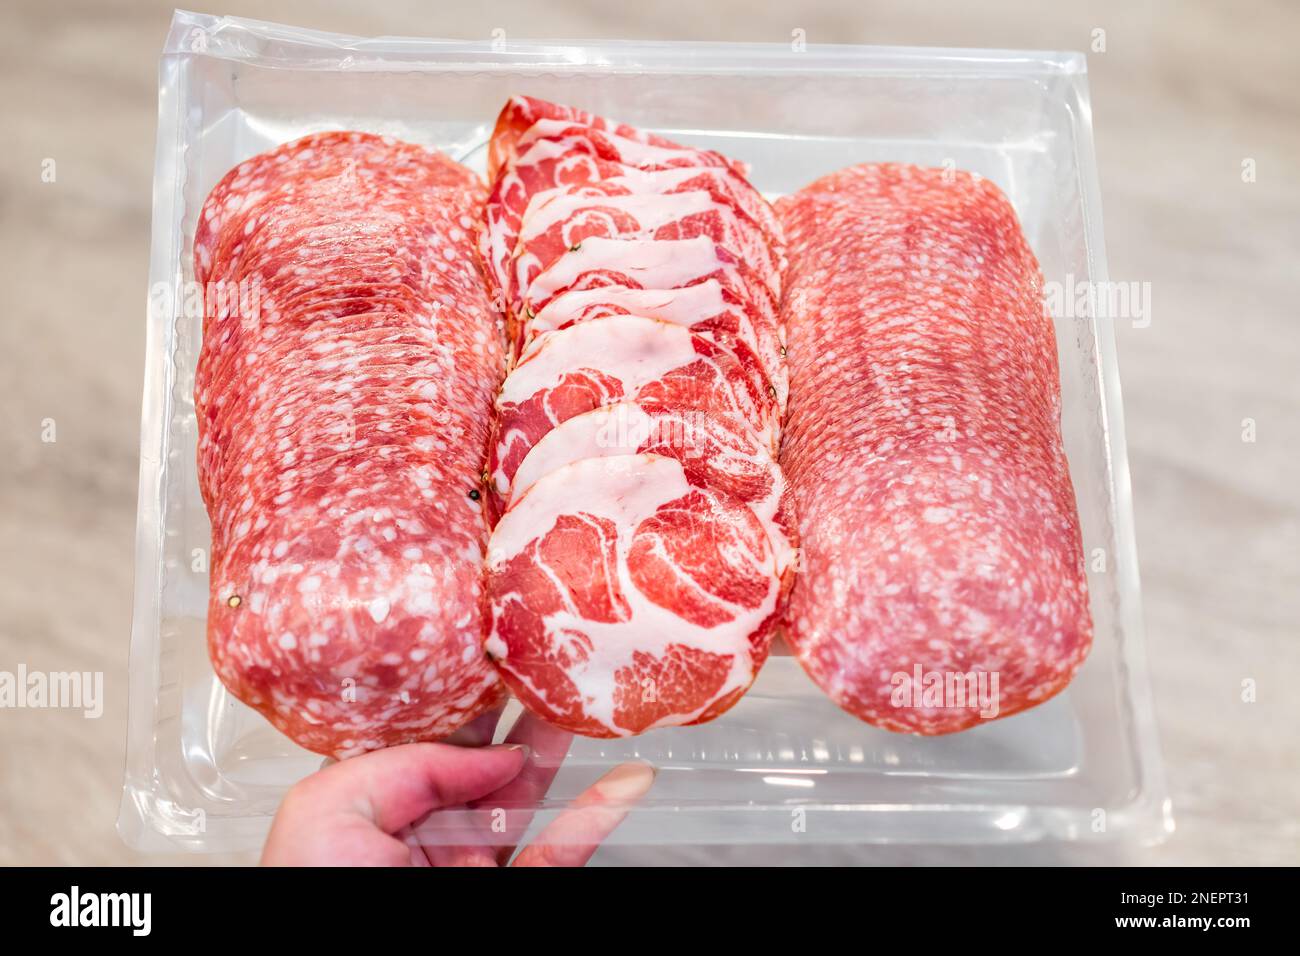 Salami slices with uncured sopressata, coppa and genoa salami with no nitrites on plastic tray with red meat pork Stock Photo